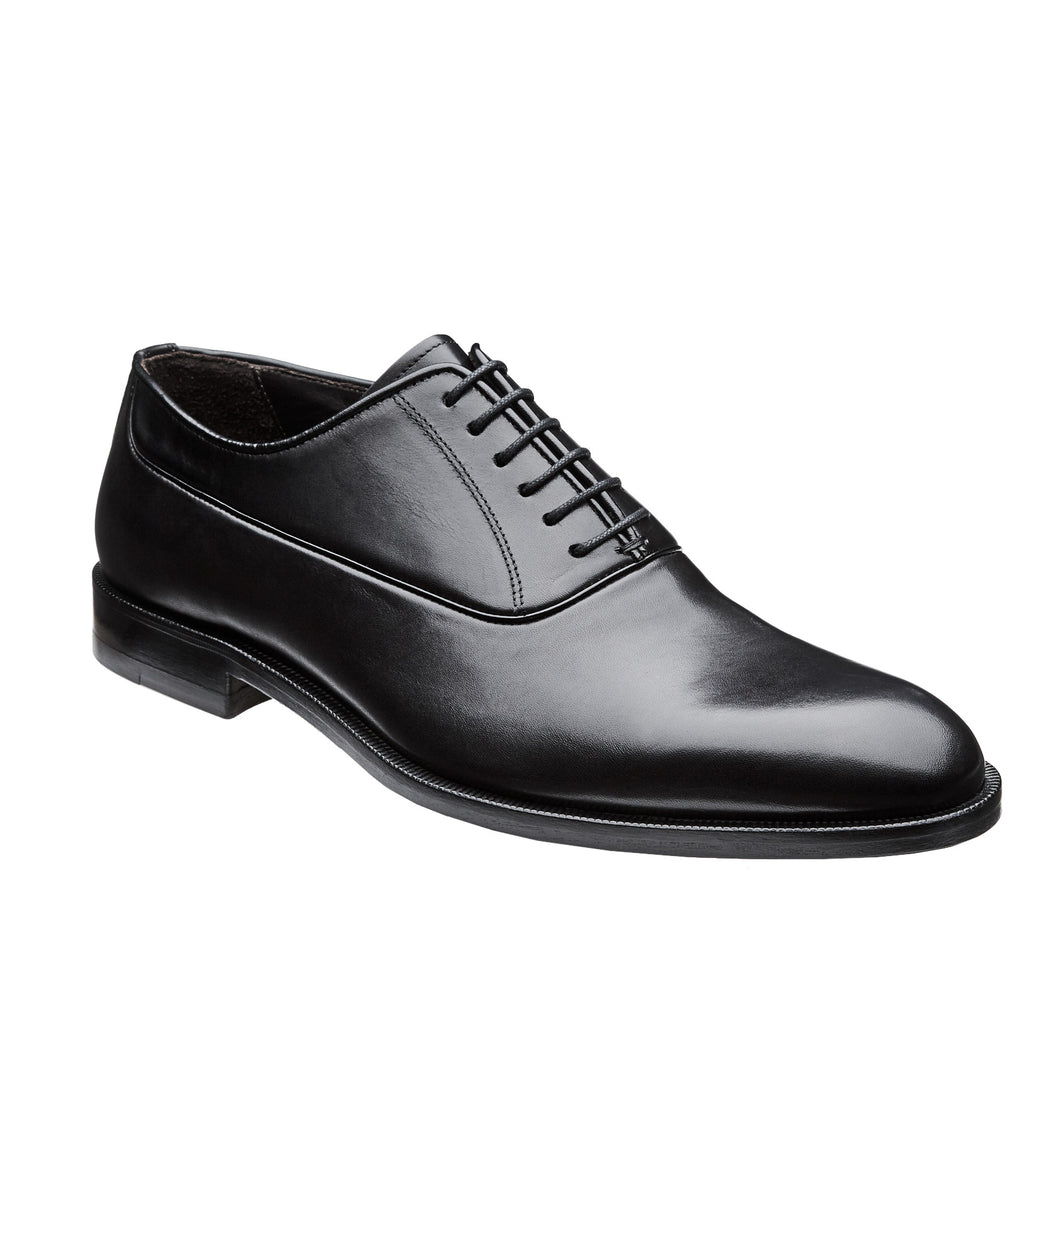 Canali Leather Oxfords